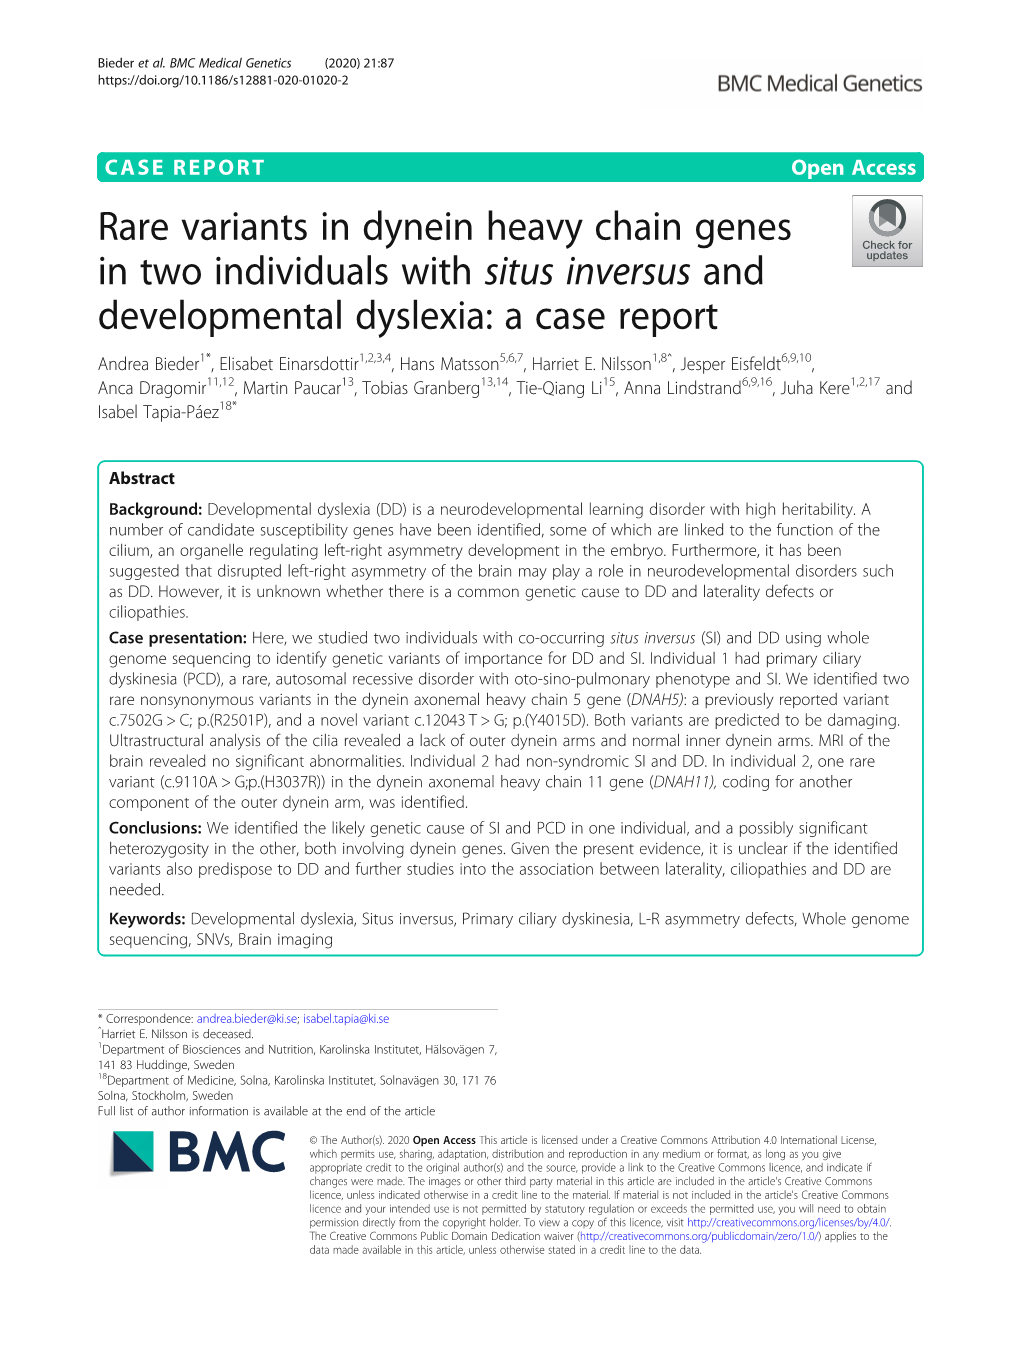 Rare Variants in Dynein Heavy Chain Genes in Two Individuals with Situs